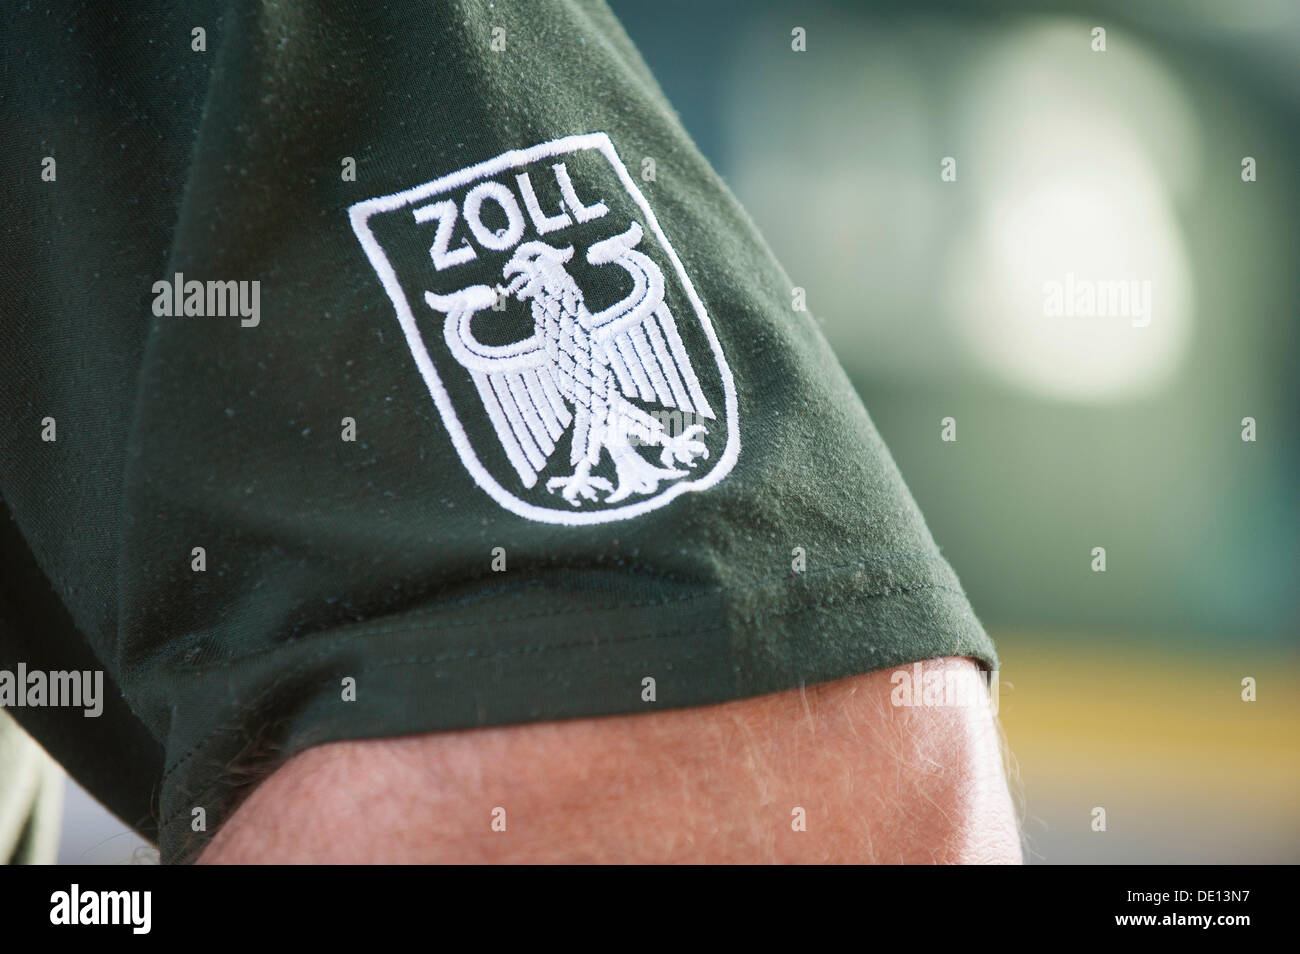 Badge 'Zoll', German for 'Customs' on the uniform of a customs official Stock Photo